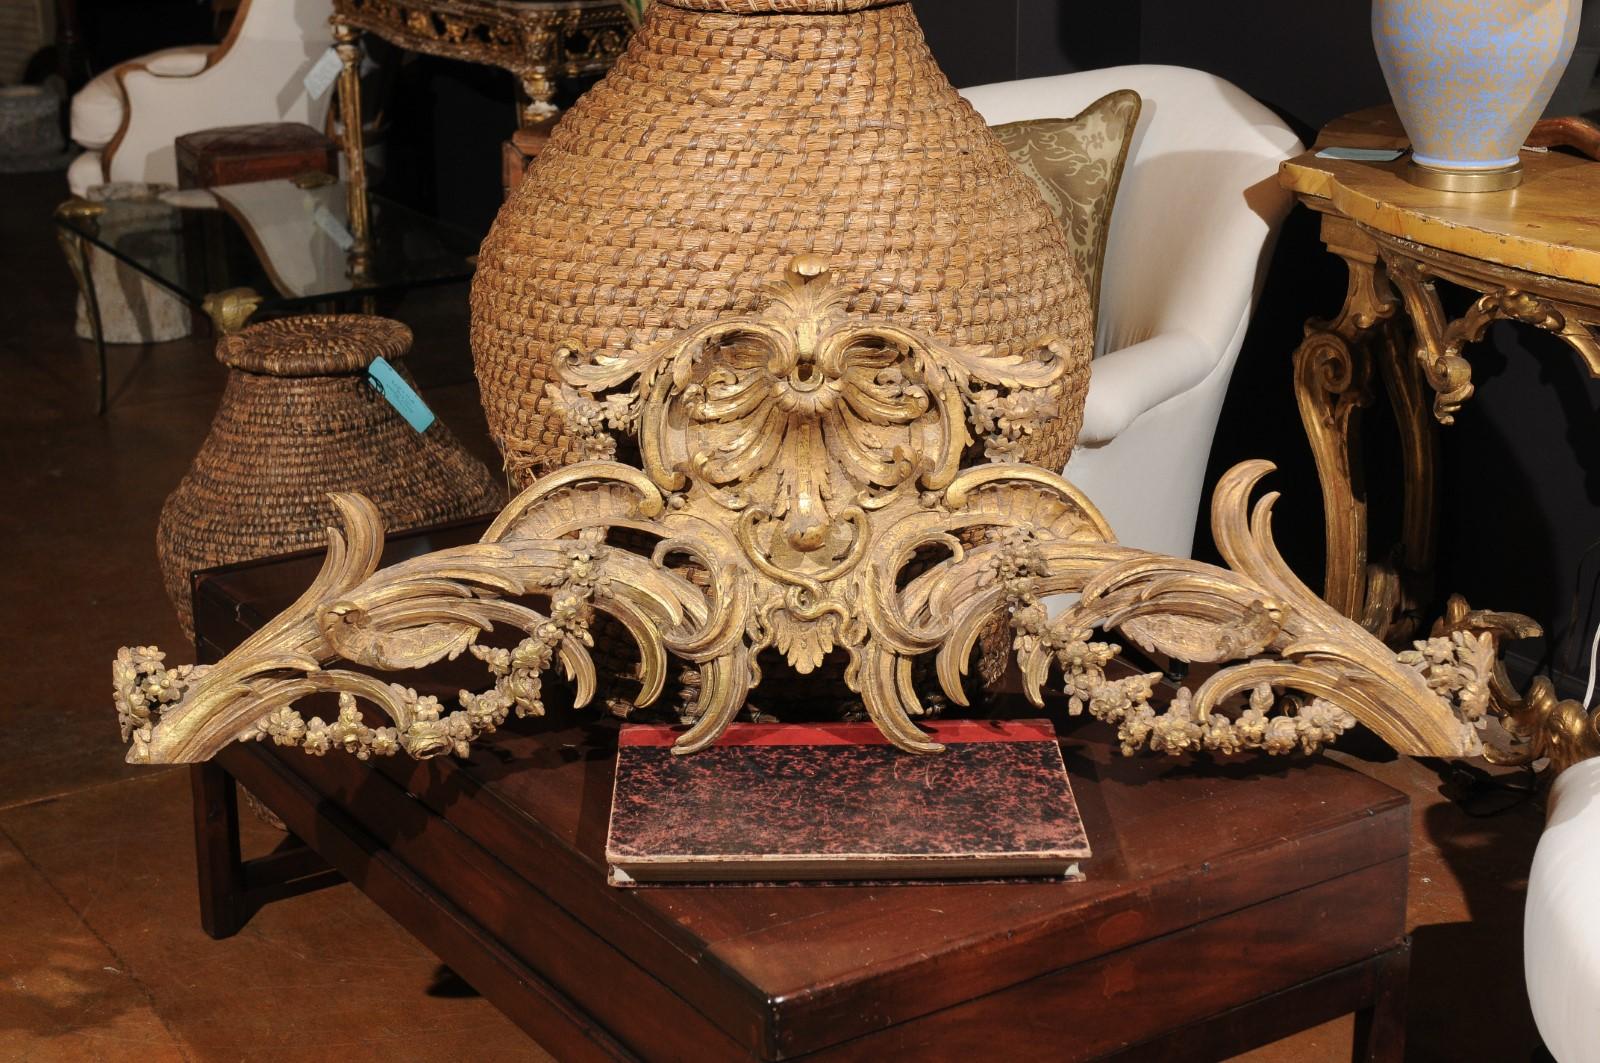 A French Rococo style parcel-gilt and carved wooden architectural swag from the 19th century, with acanthus leaves, C-scrolls and swag. Born in France during the 19th century, this architectural element features an exquisite hand-carved crest,